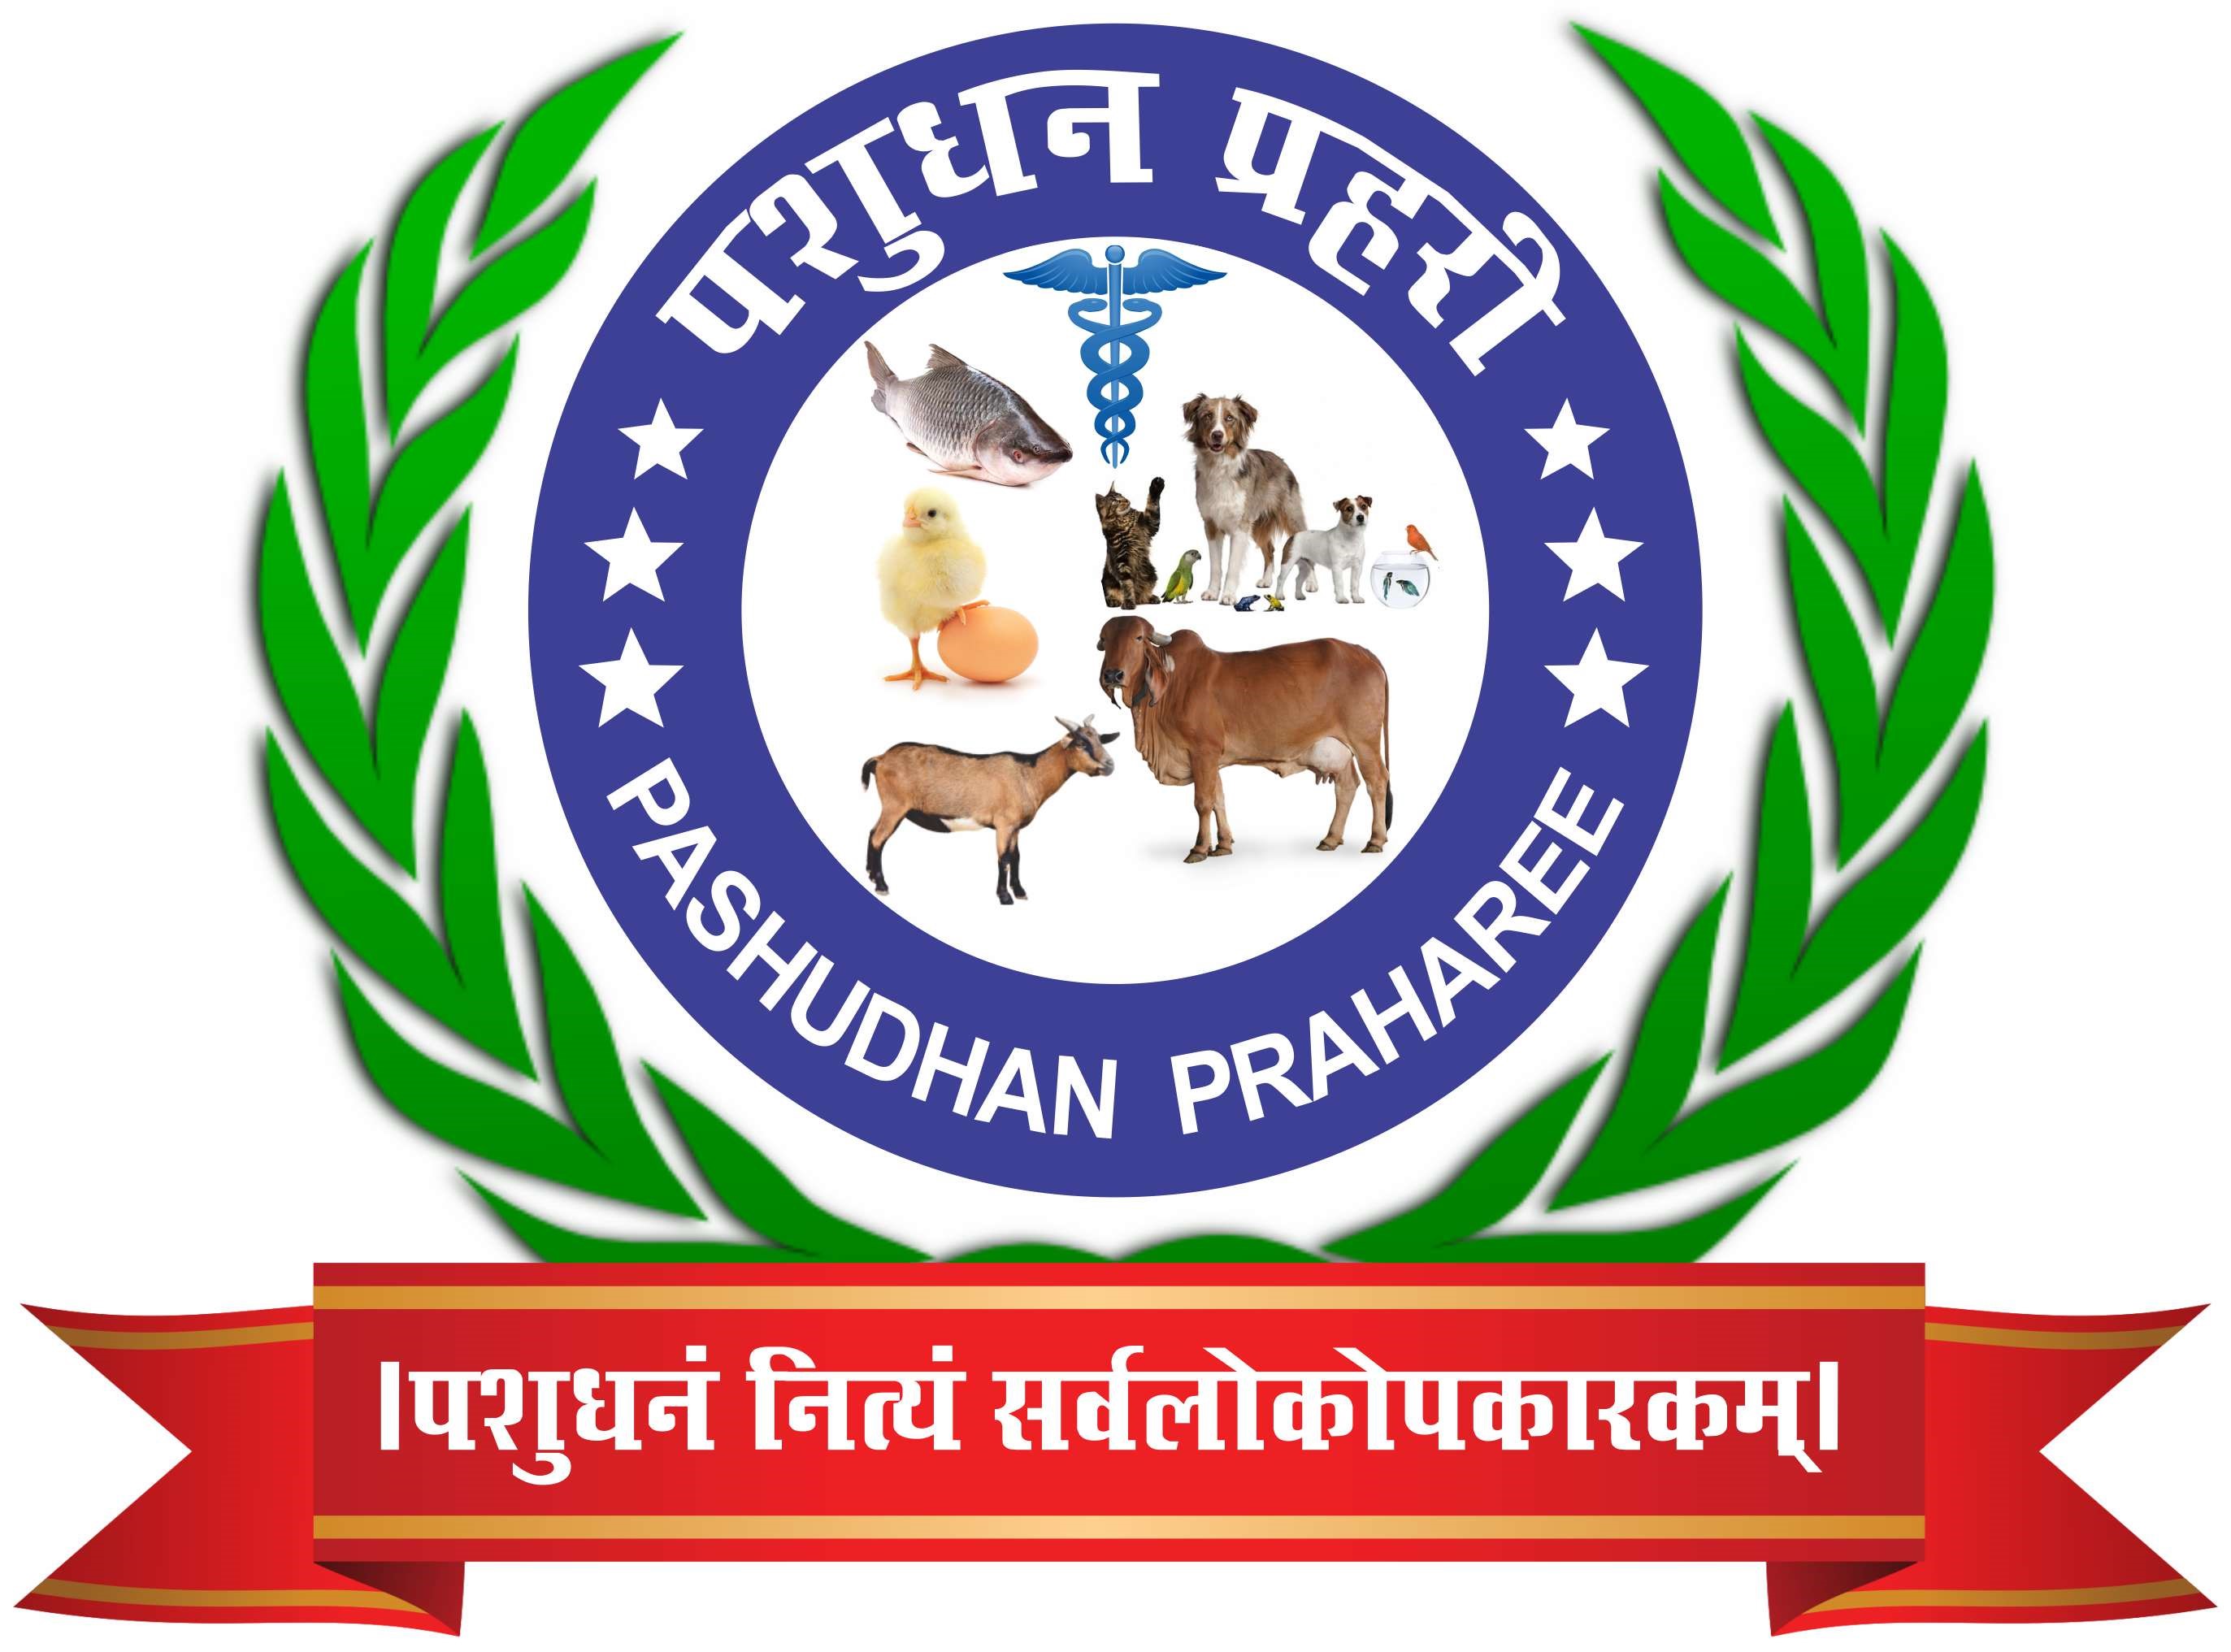 All India Popular Technical Article (Veterinary and Animal Husbandry  Practices) Writing Competition 2020 – Pashudhan praharee